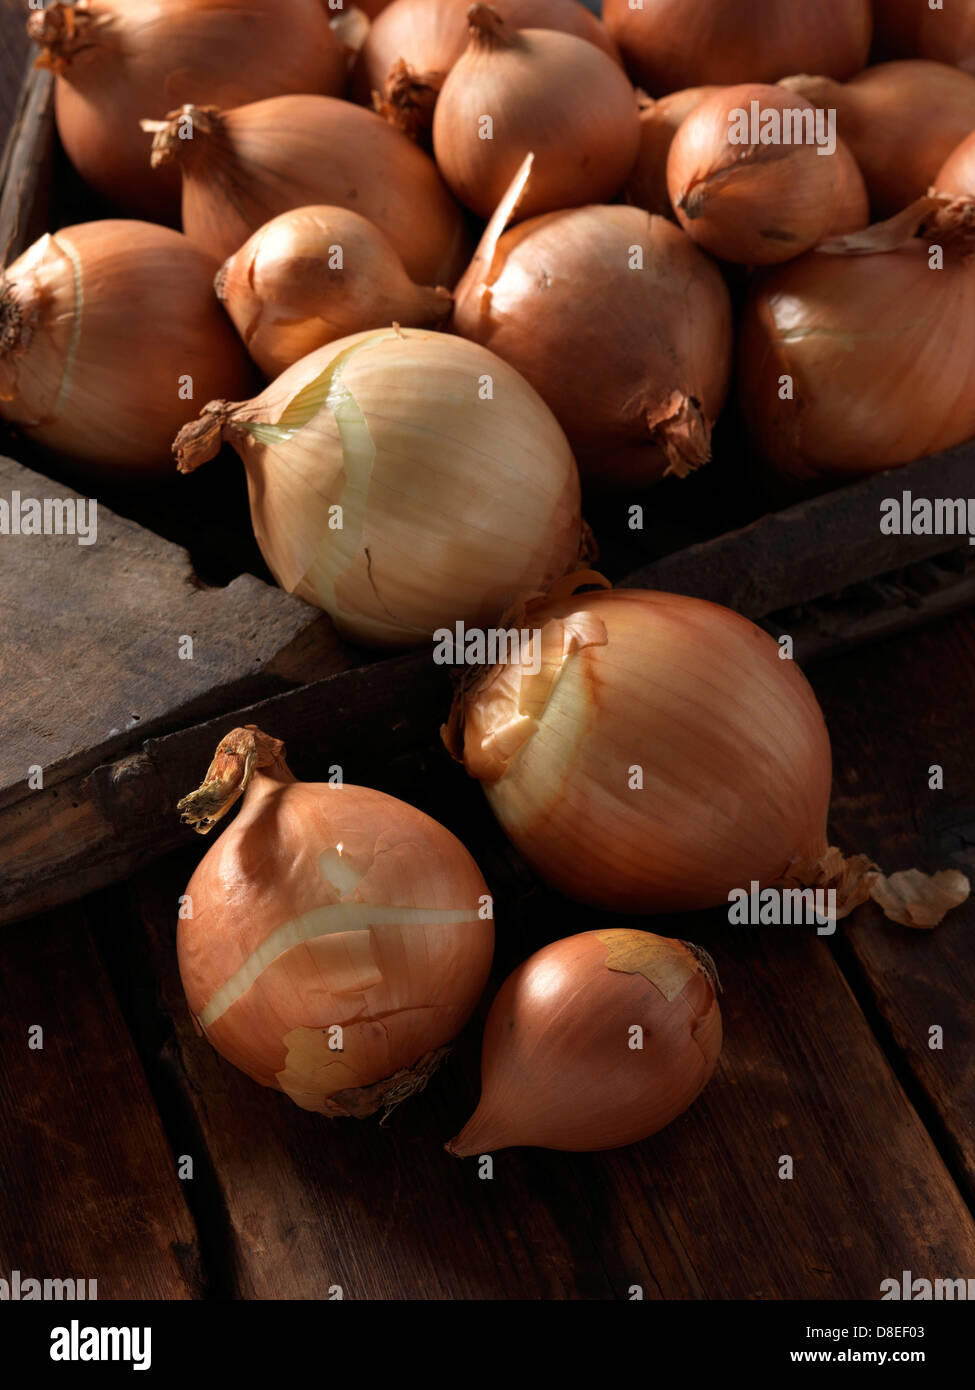 Onions whole raw cooking ingredients Stock Photo